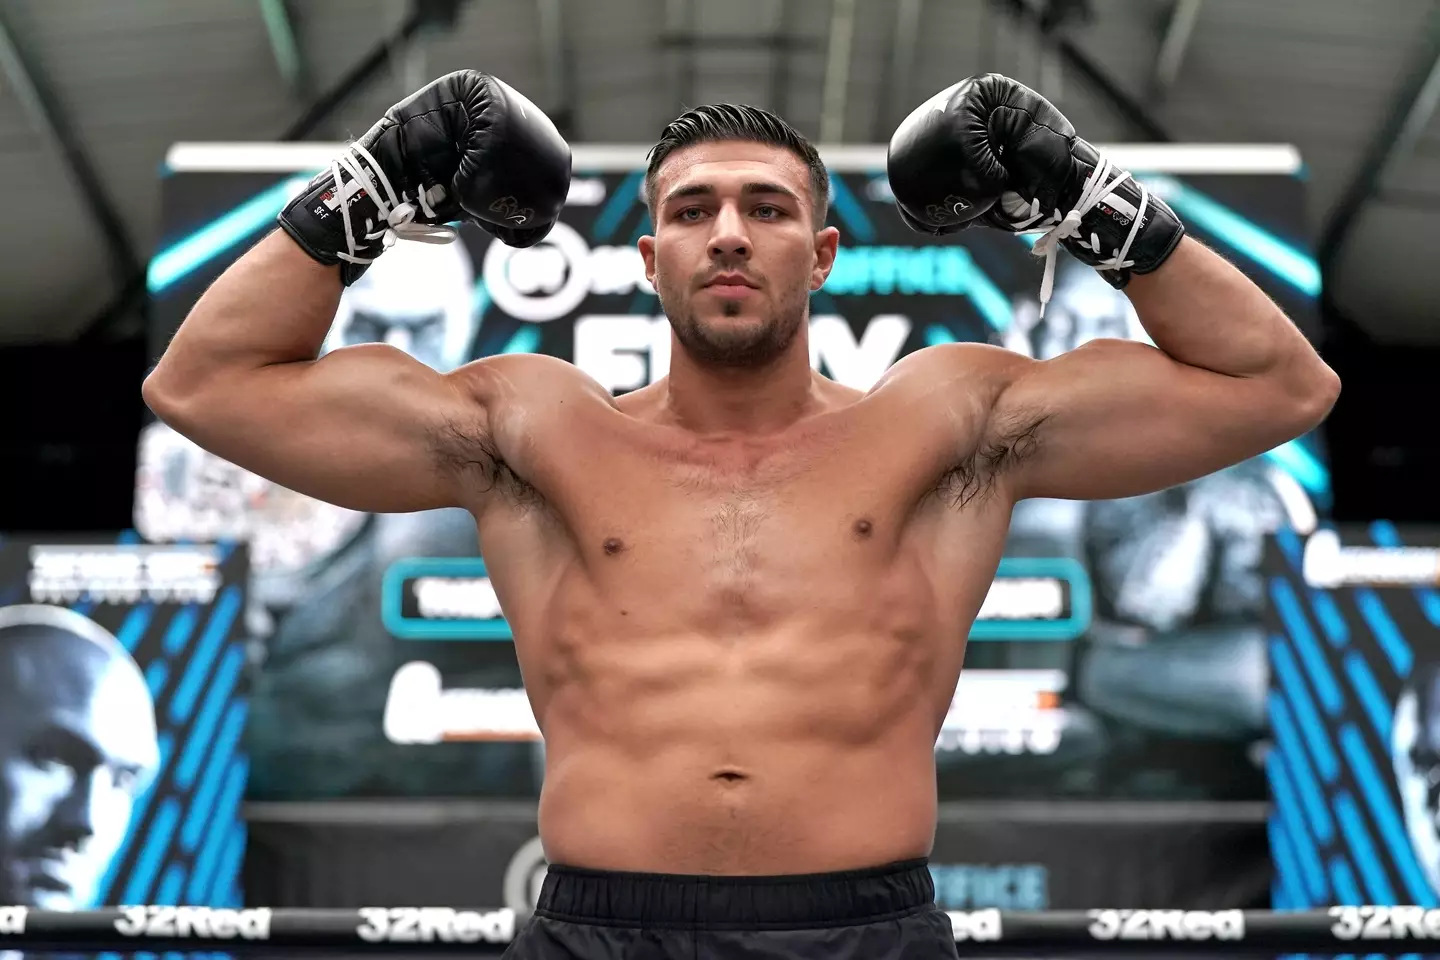 Tommy Fury won the eight-round fight in the end.